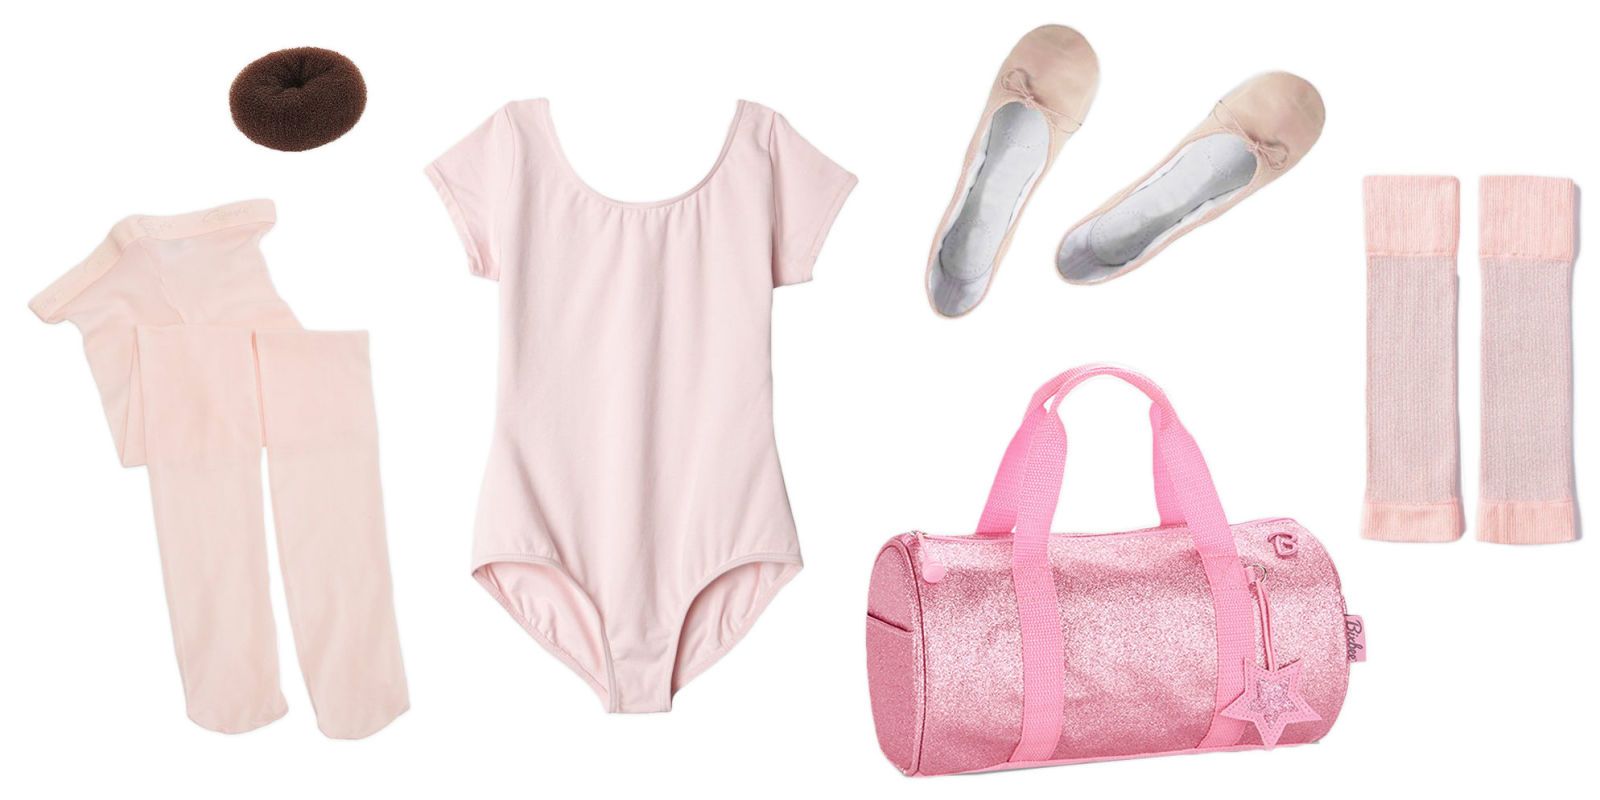 ballet dance outfits for toddlers